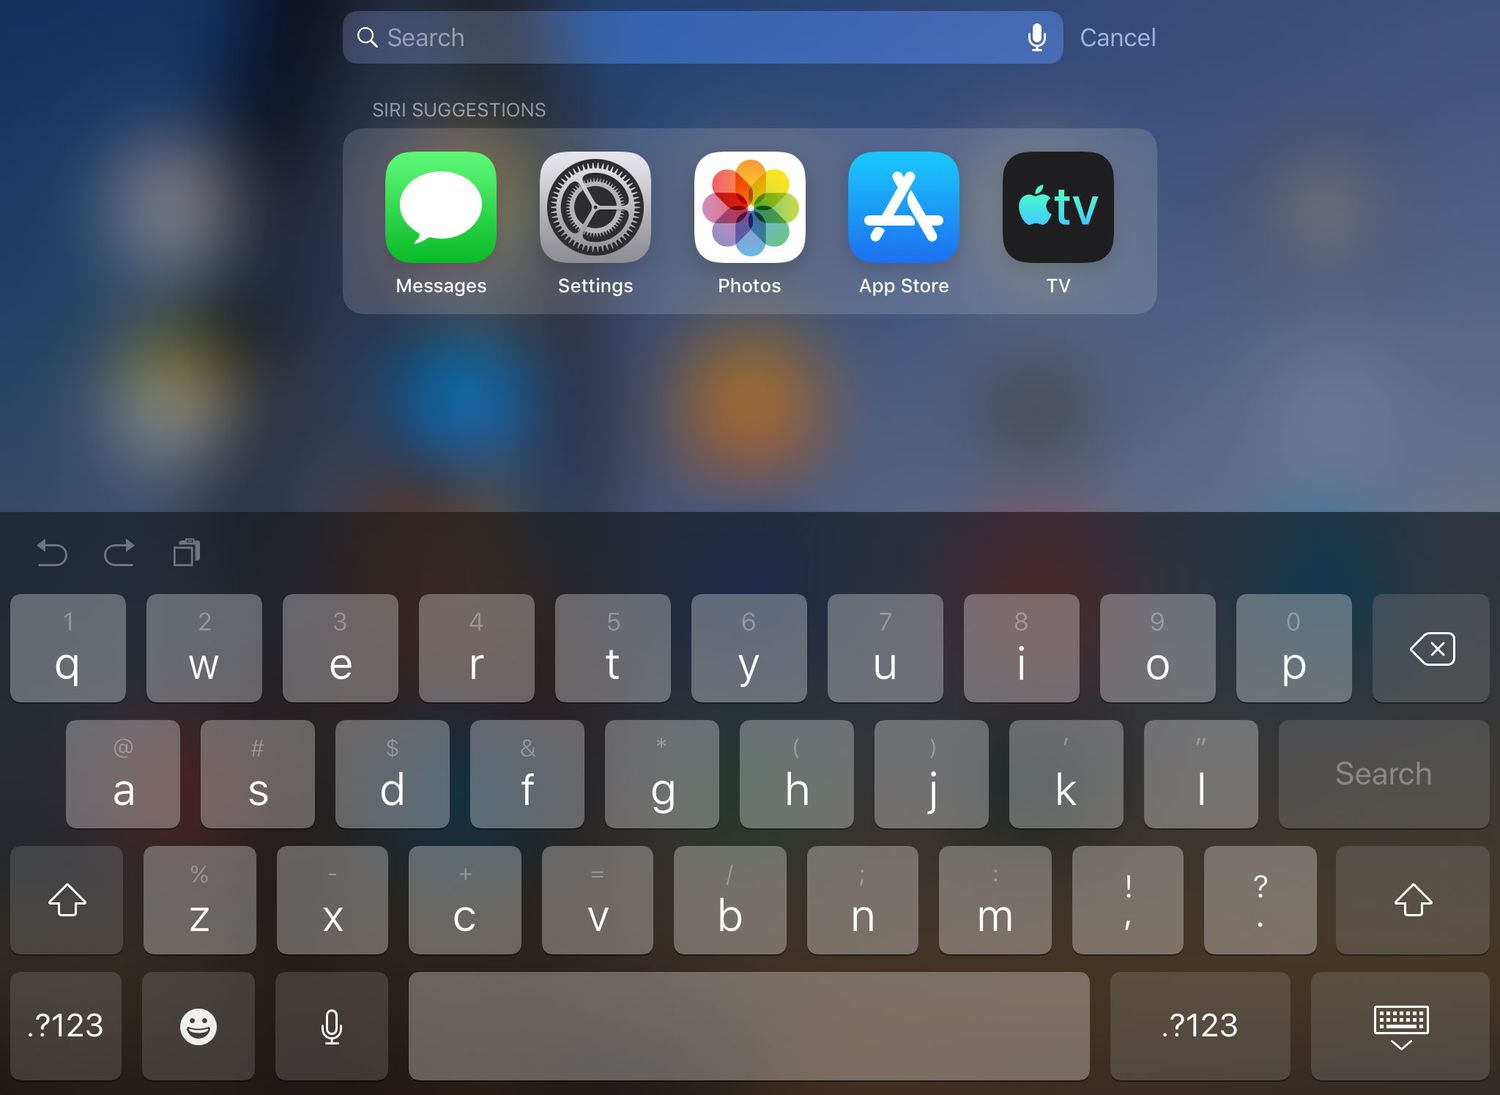 how-to-use-keyboard-shortcuts-on-ipad-for-spotlight-search-and-return-to-home-screen